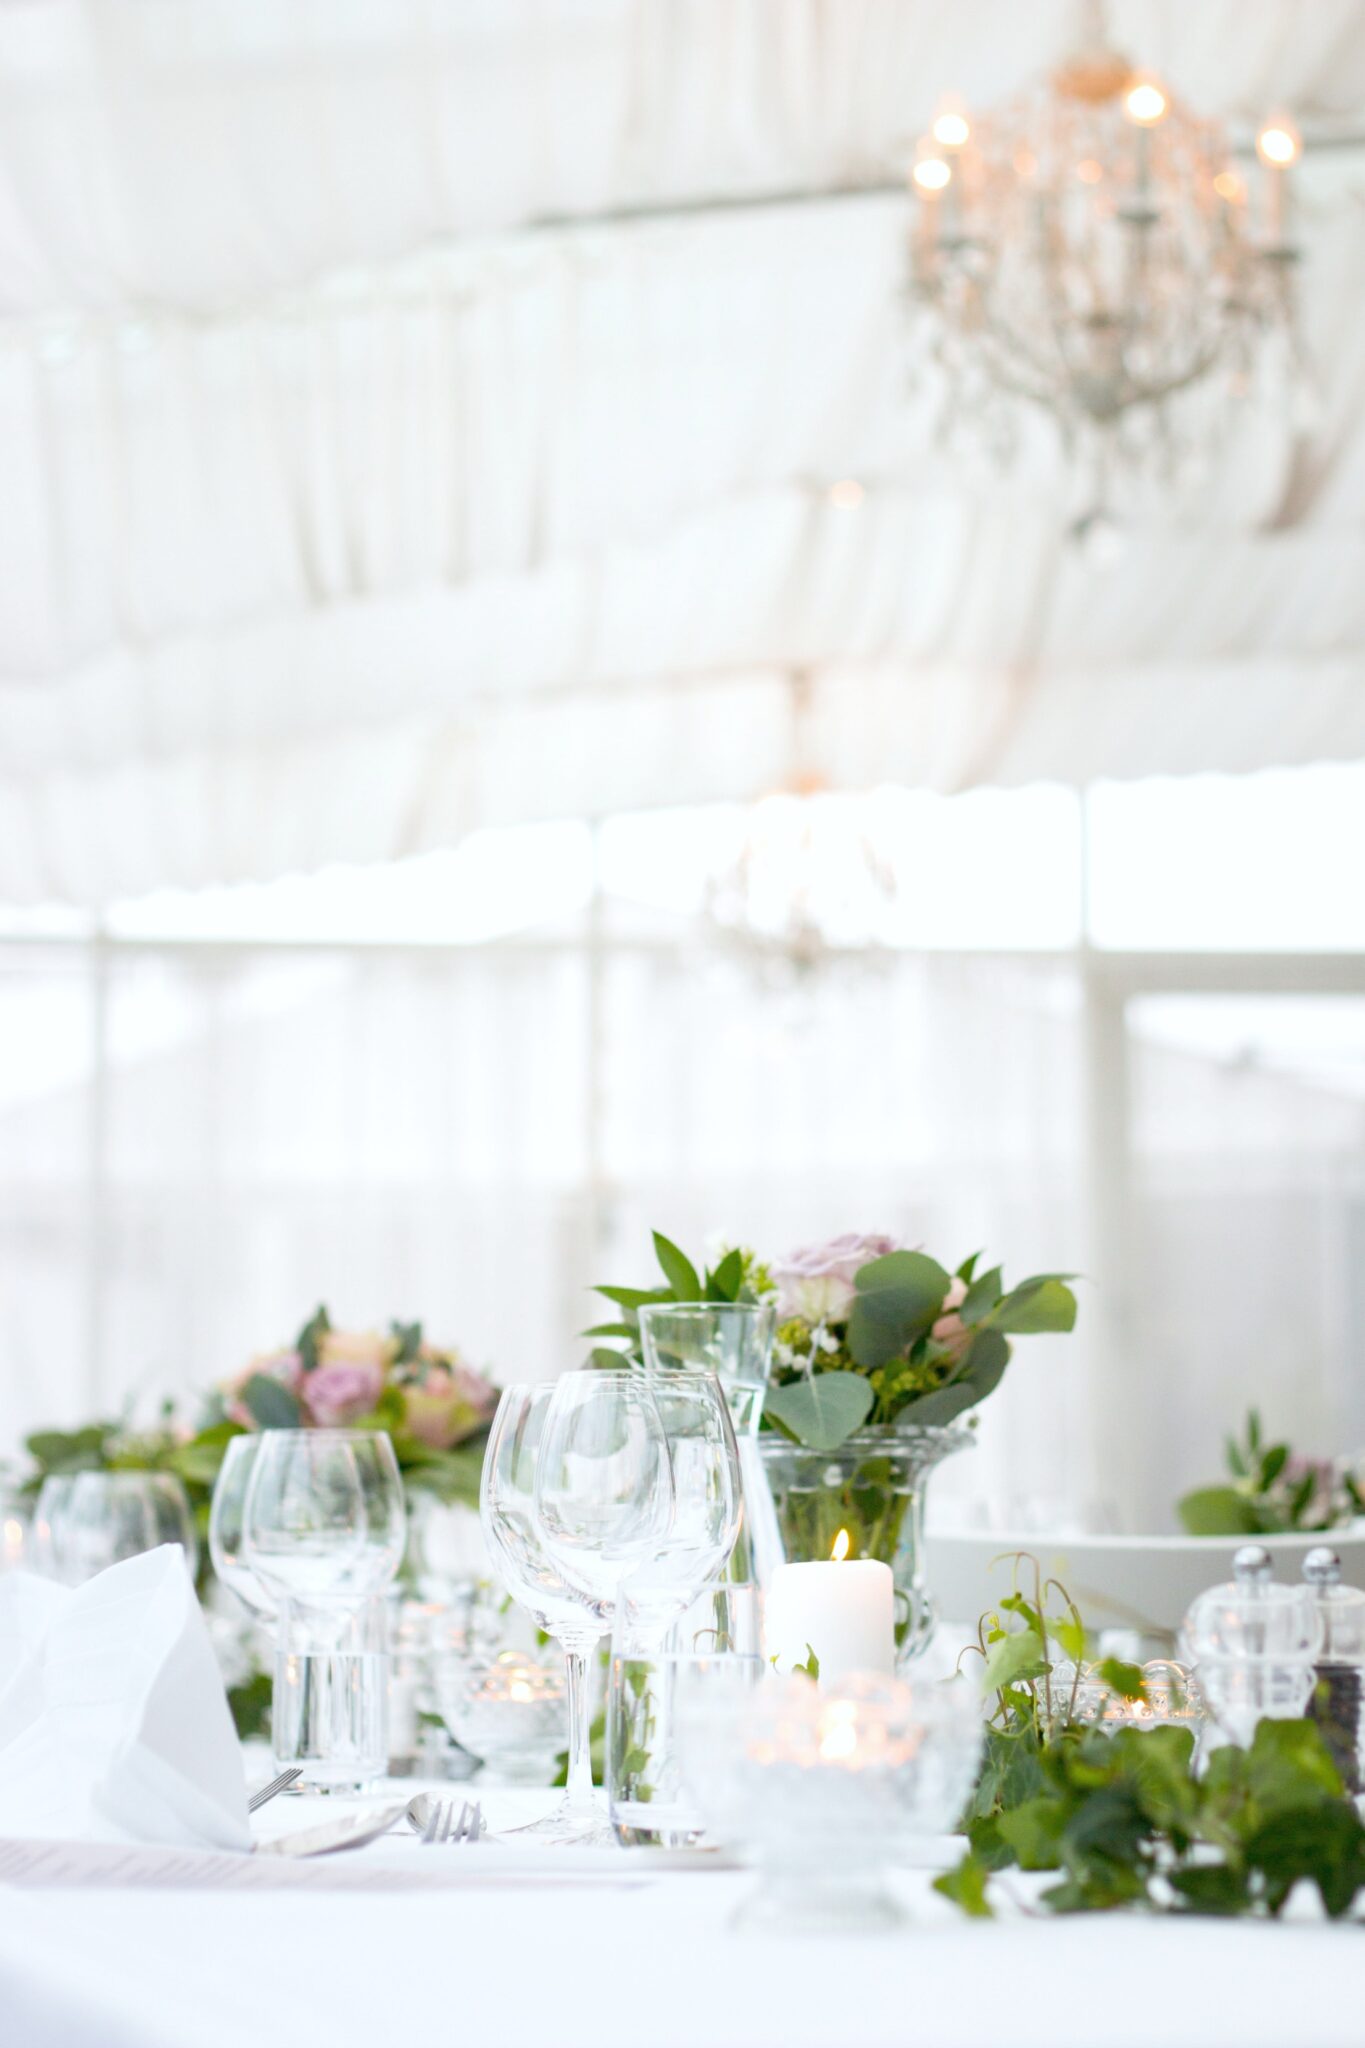 A table decorated and set for a wedding. Weddings have changed since the pandemic, here is how to plan the perfect wedding for 2021.